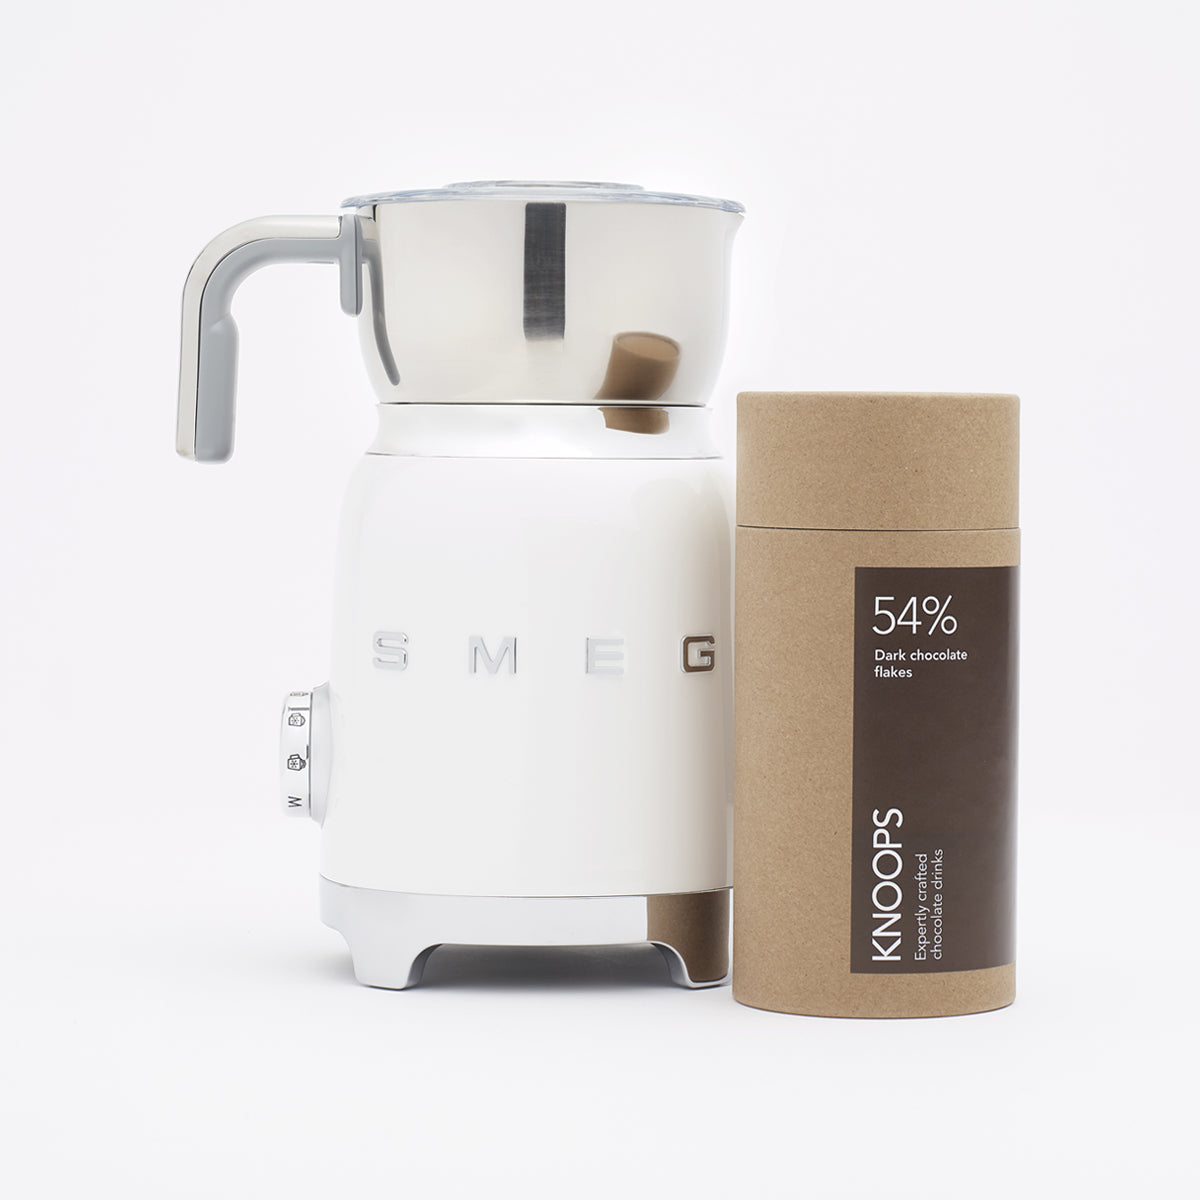 The new Smeg milk frother makes the ultimate hot chocolate